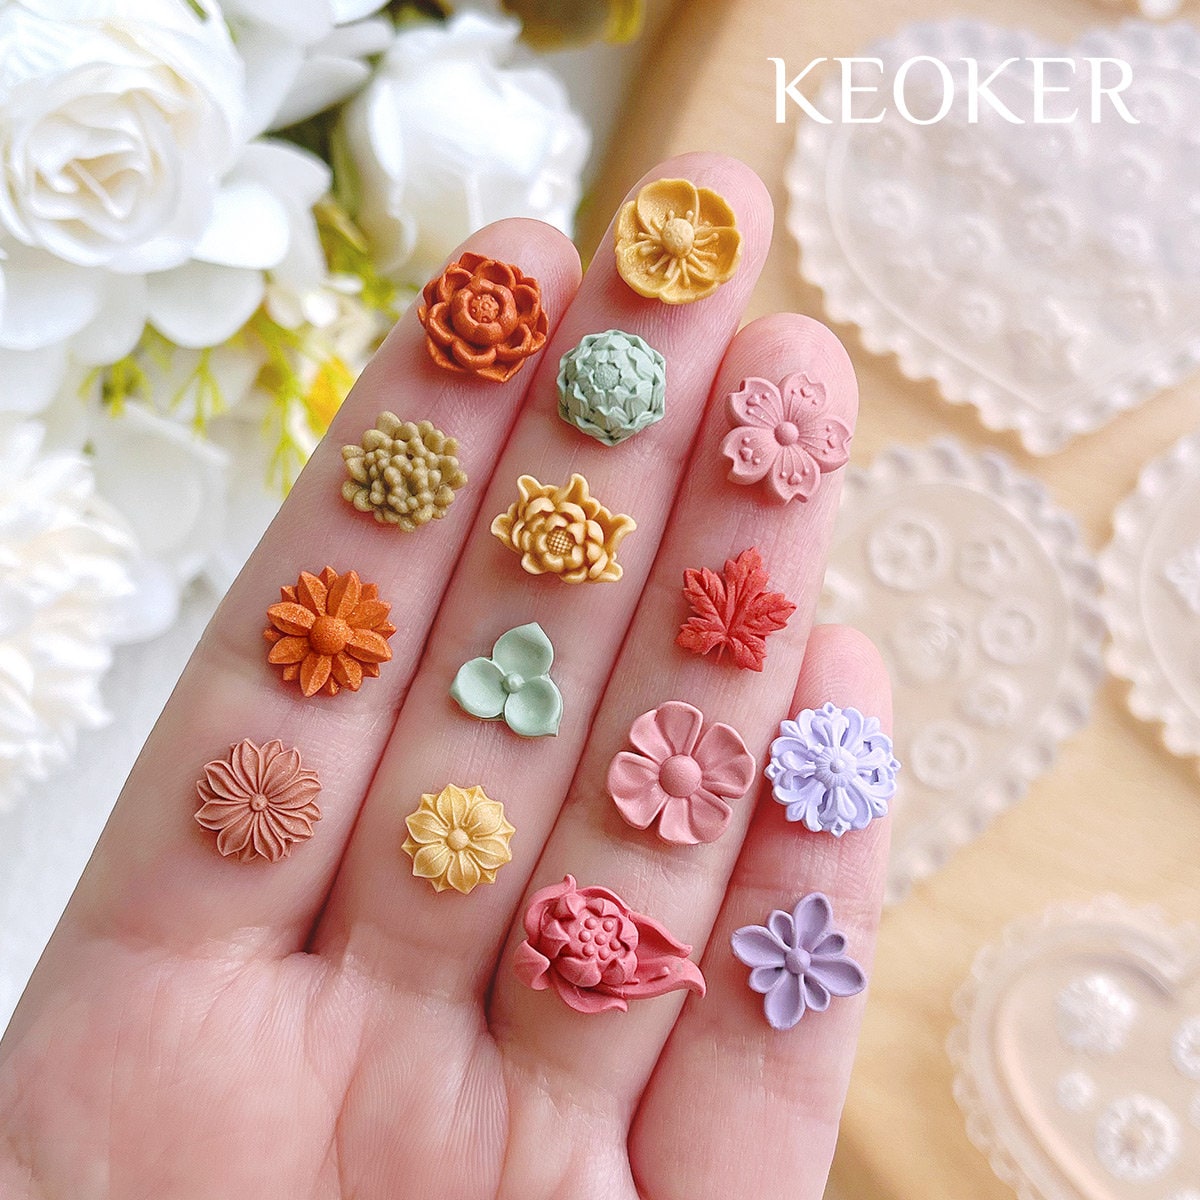 Keoker Mini Polymer Clay Cutters 15 Shapes Mini Flower Polymer Clay Cutters  for Earrings Making, Leaf Clay Earring Cutter Set 